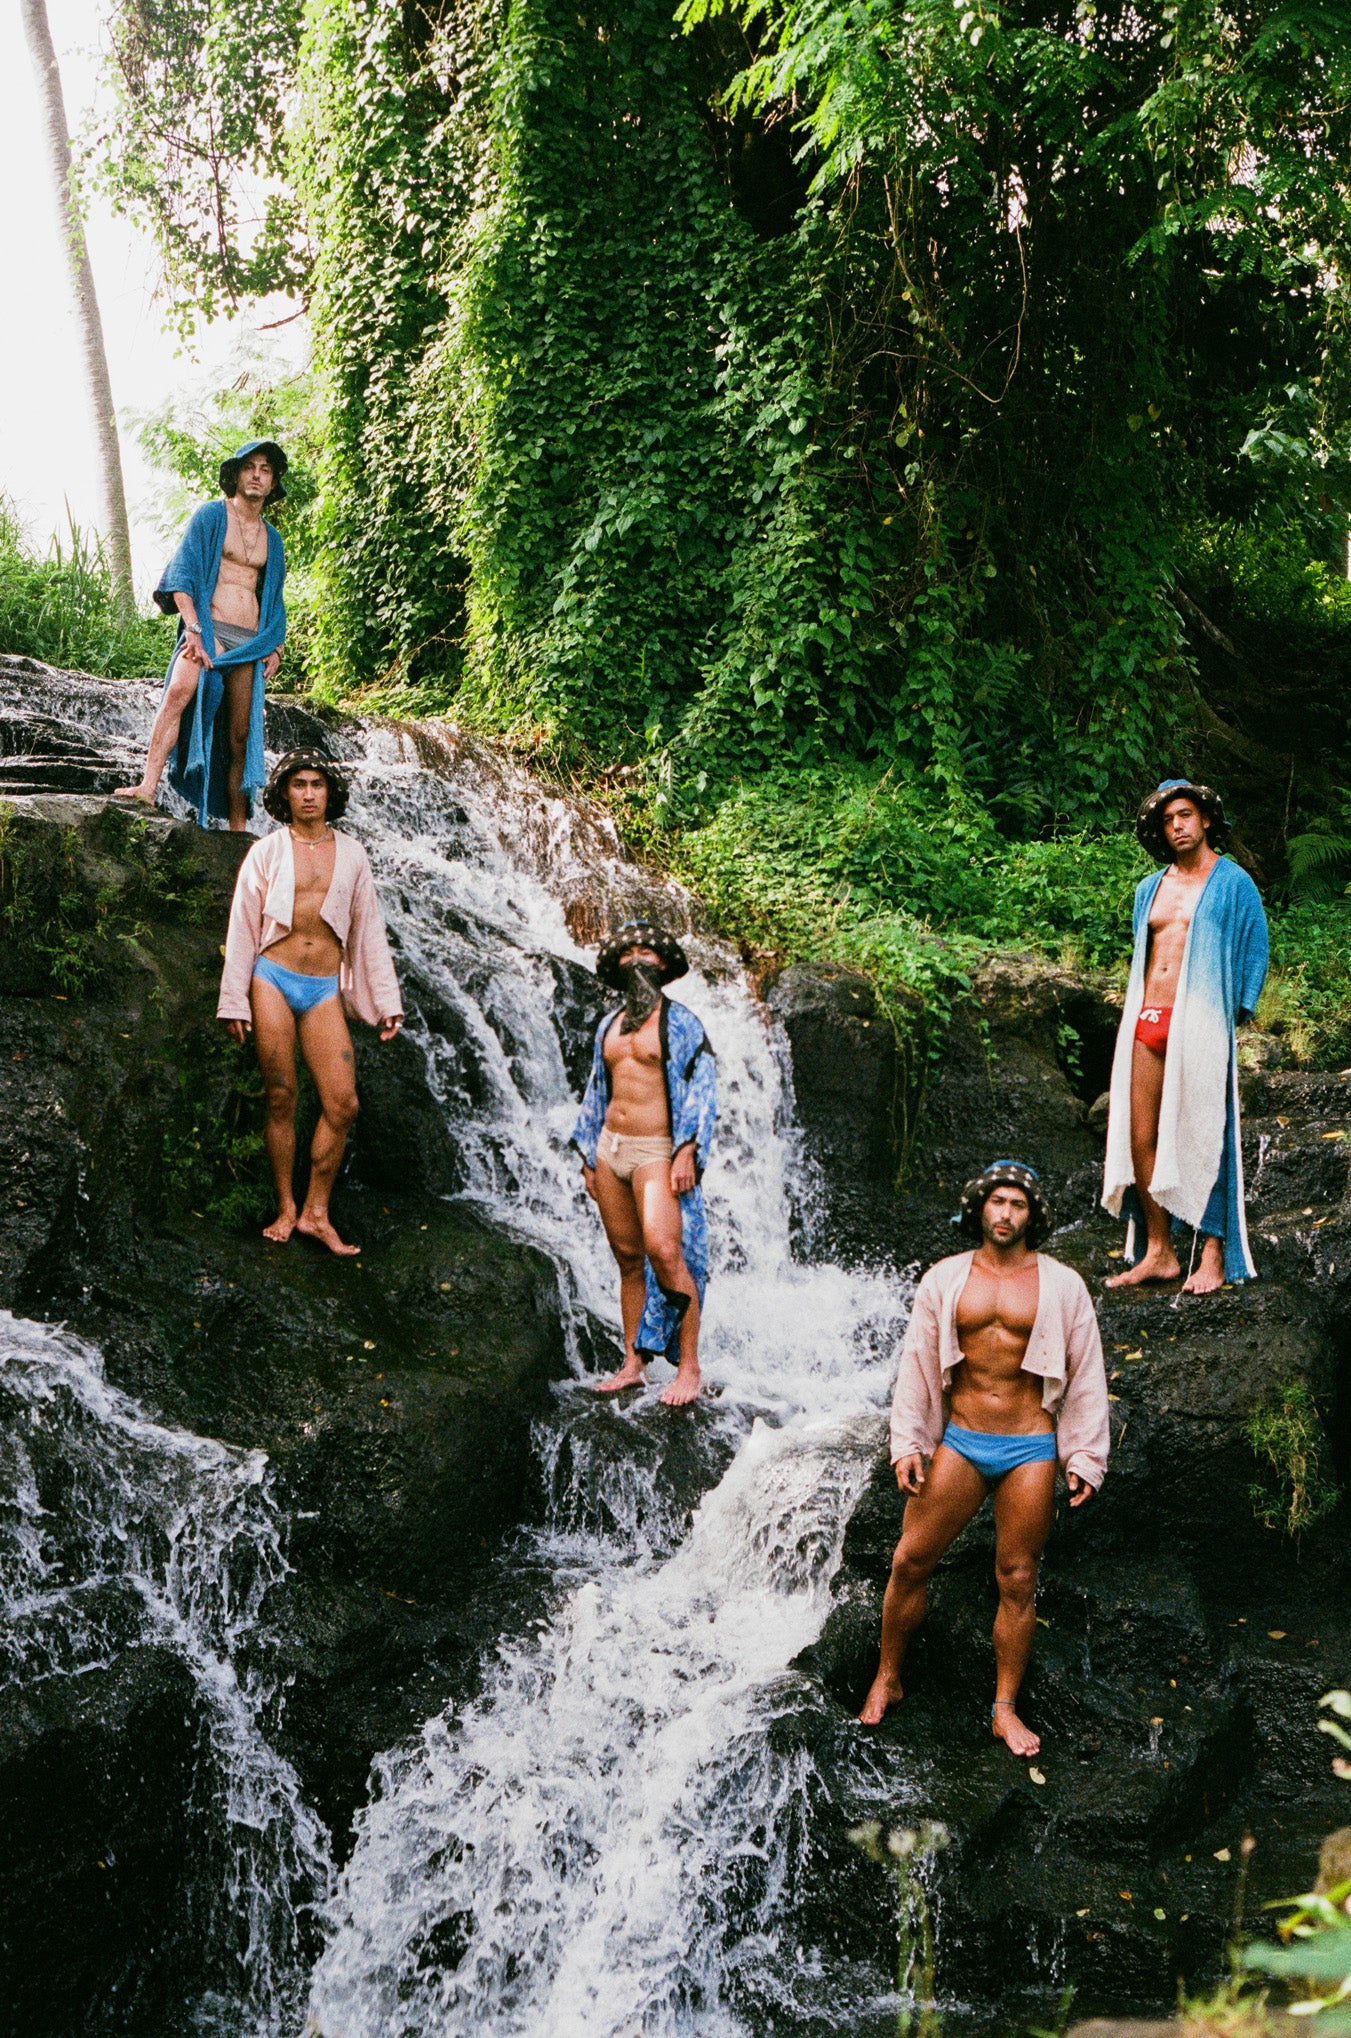 Look Book Shot Bodies As Clothing Men at the waterfall 